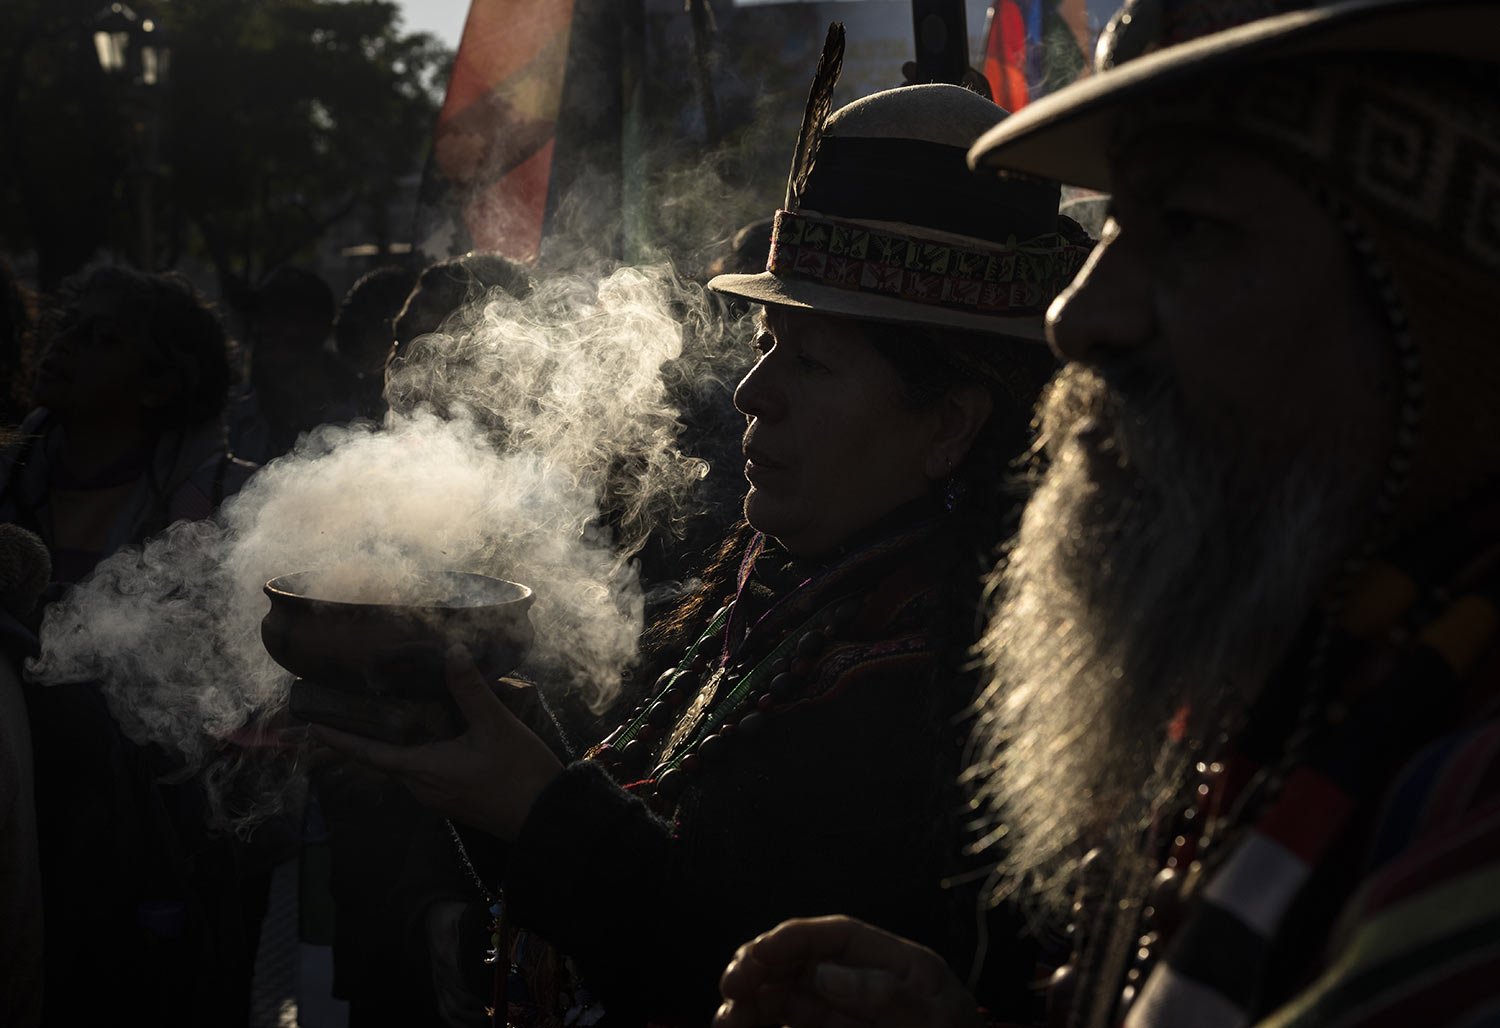  Indigenous leaders from the Jujuy province burn incense during the celebrations of Mother Earth Day in Buenos Aires, Argentina, Aug. 1, 2023. The group's gathering is also a protest against a provincial constitutional reform they claim is an attempt